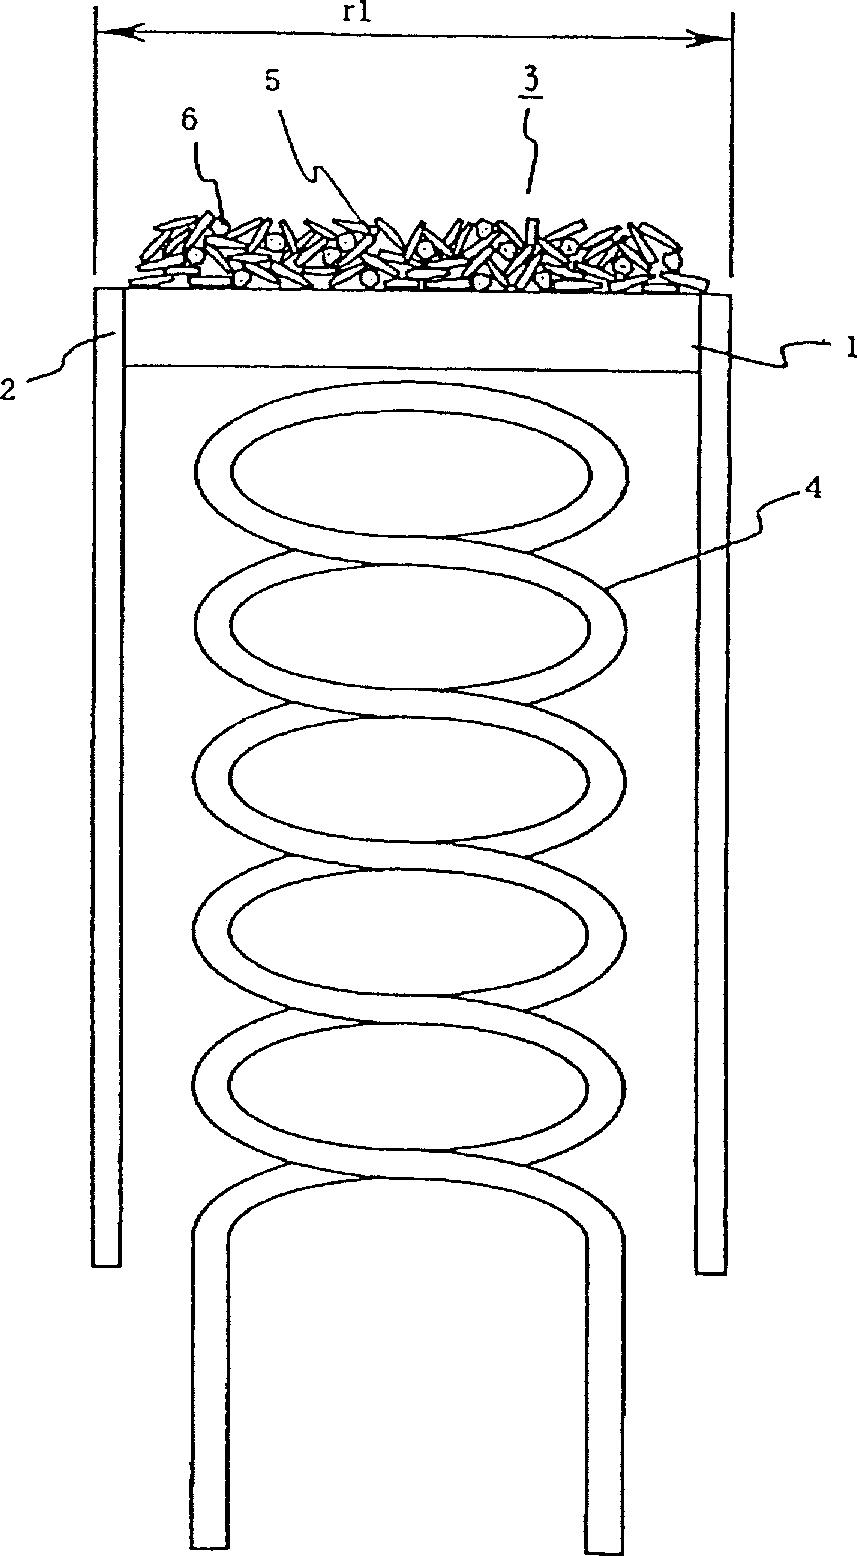 Cathode-ray tube having oxide cathode and method for producing same